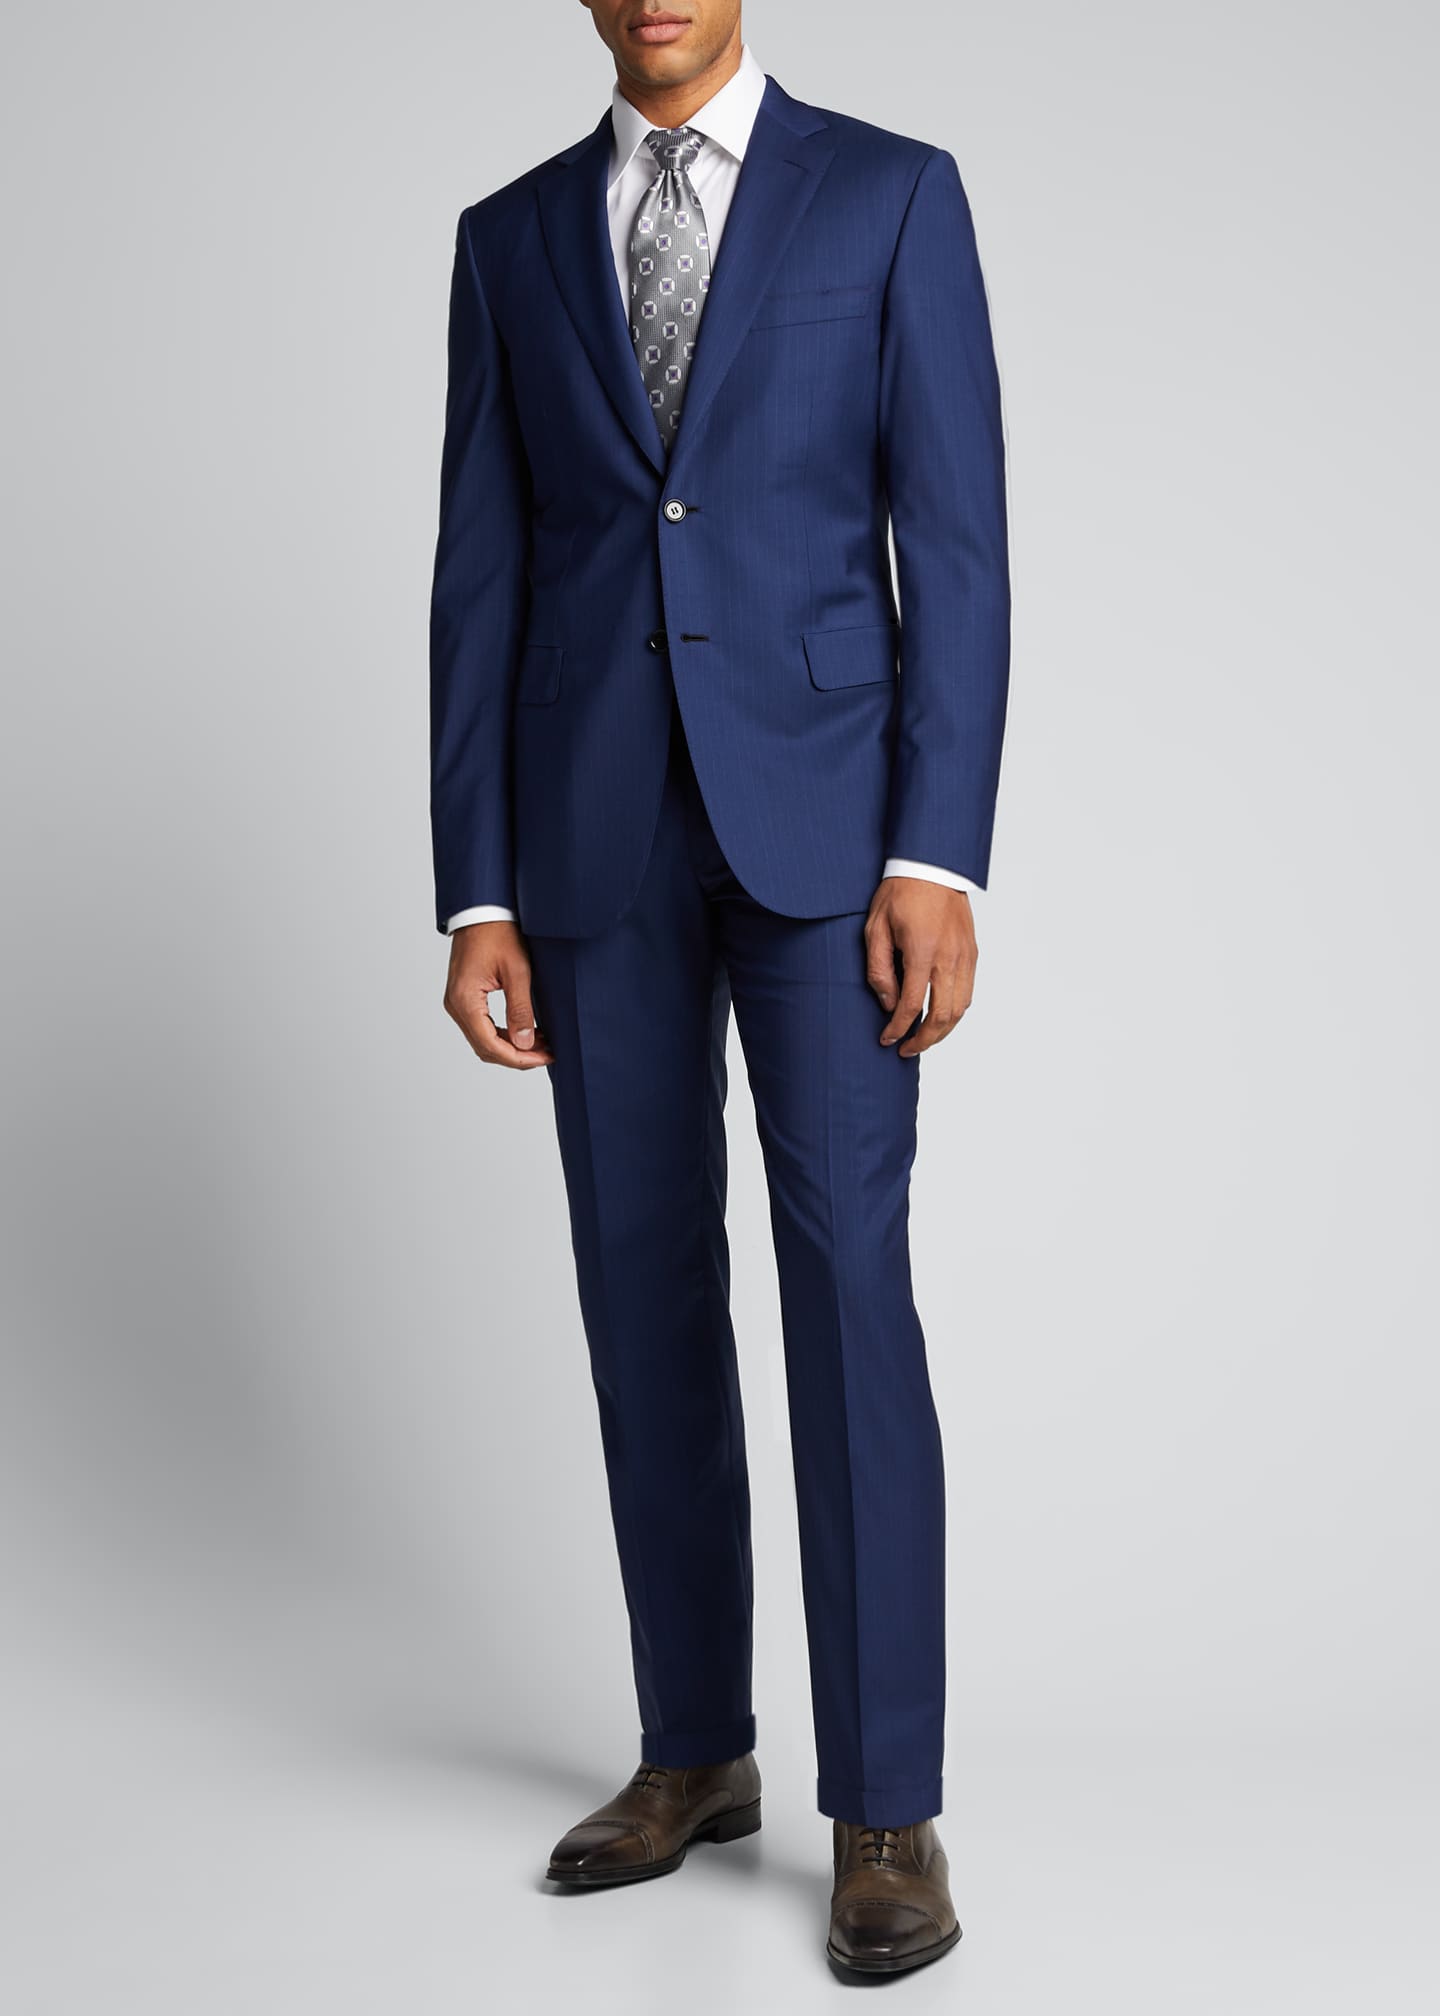 TOM FORD O'Connor Base Peak-Lapel Pinstripe Two-Piece Suit, Navy